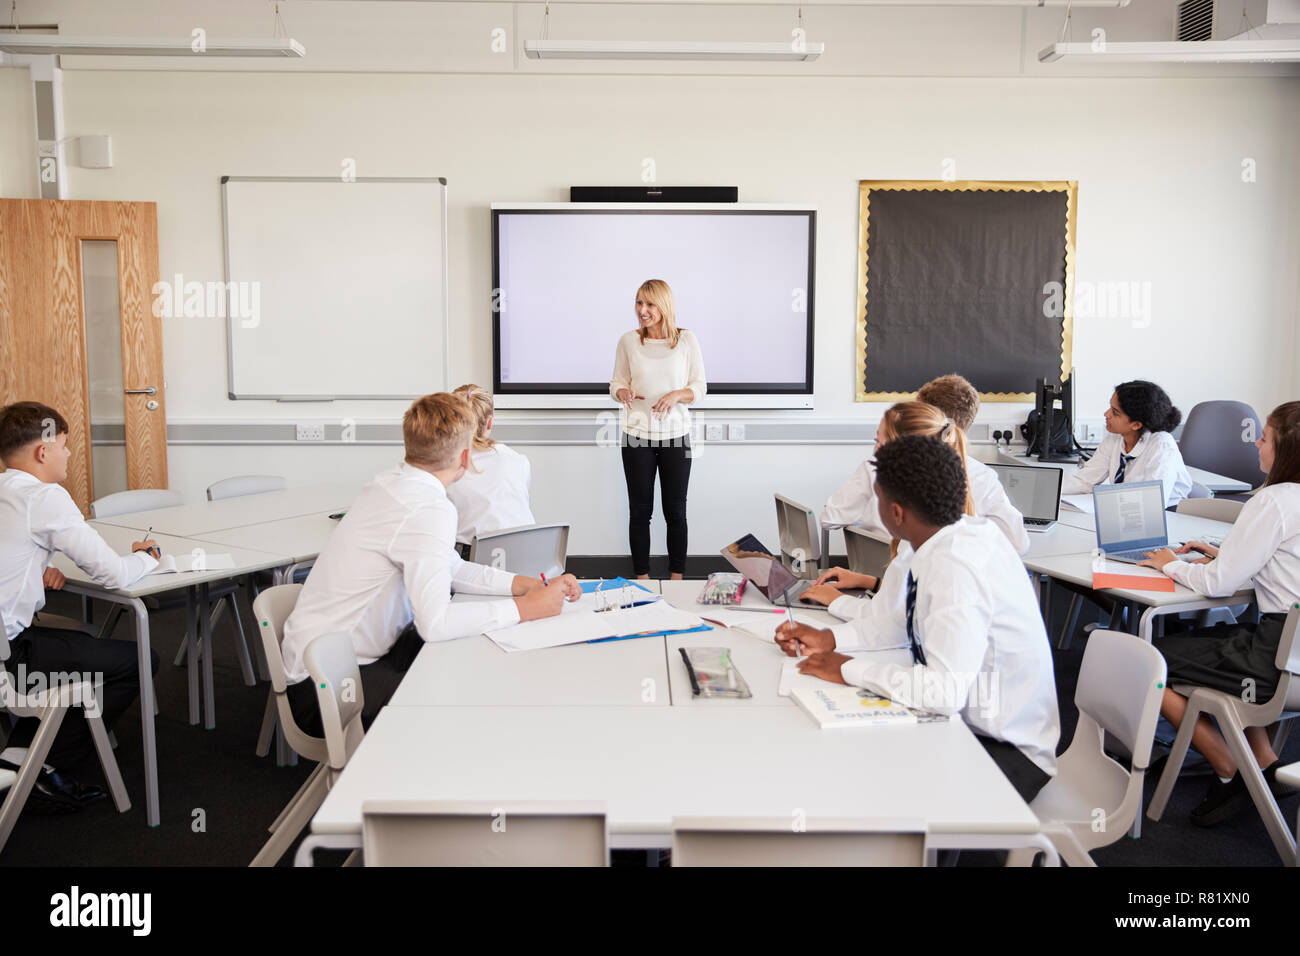 Female High School Teacher Standing Next To Interactive Whiteboard And Teaching Lesson To Pupils Wearing Uniform Stock Photo